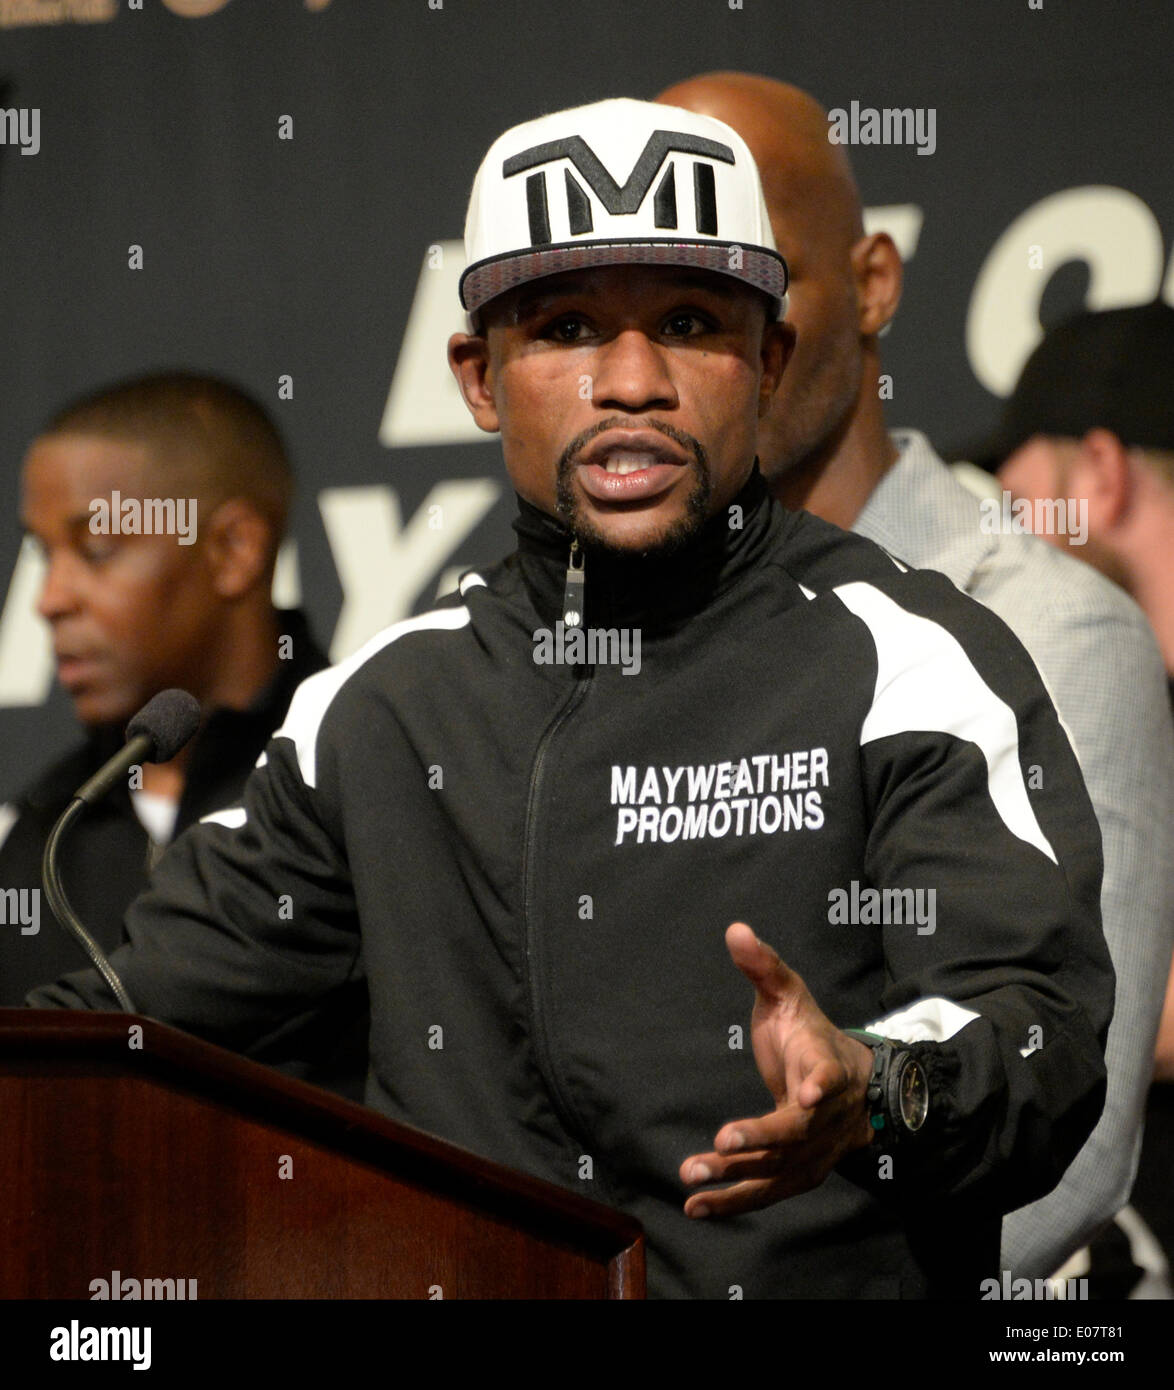 May 3, 2014. Las Vegas Nevada-USA.Floyd Mayweather Jr. at the after fight press conference with Marco Maidana Saturday night at the MGM grand hotel. Floyd Mayweather Jr. took the win by a majority decision over Marco Maidana for the WBC-WBA & Ring magazine welterweight title in Las Vegas. Photo by Gene Blevins/LA DailyNews/ZumaPress (Credit Image: © Gene Blevins/ZUMAPRESS.com) Stock Photo